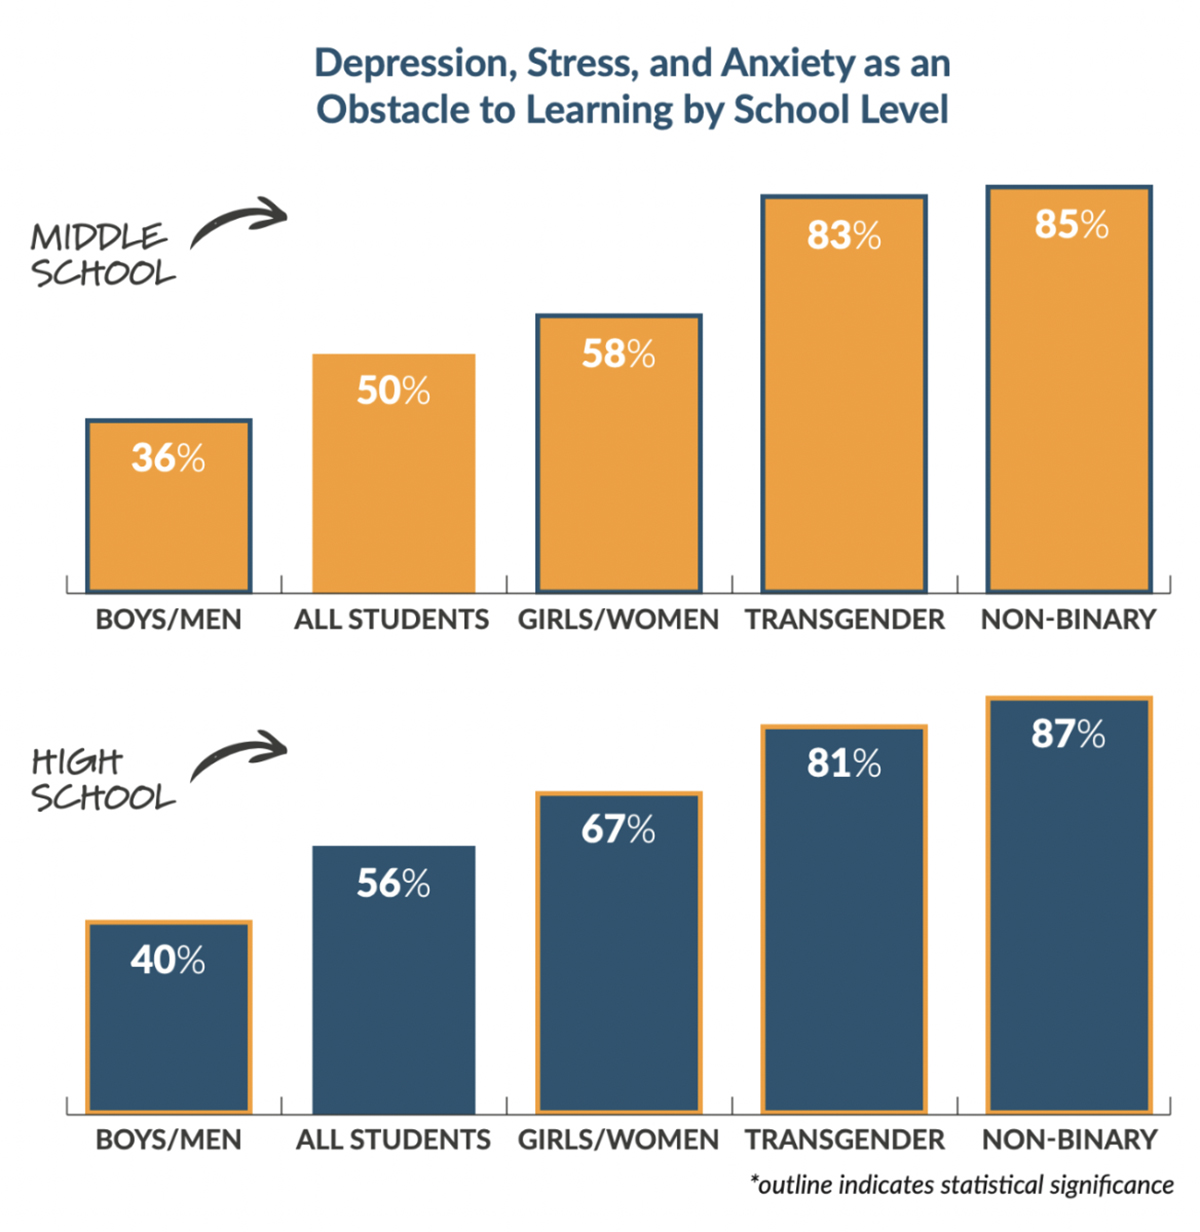 A New Normal National Student Survey Finds Mental Health Top Learning Obstacle